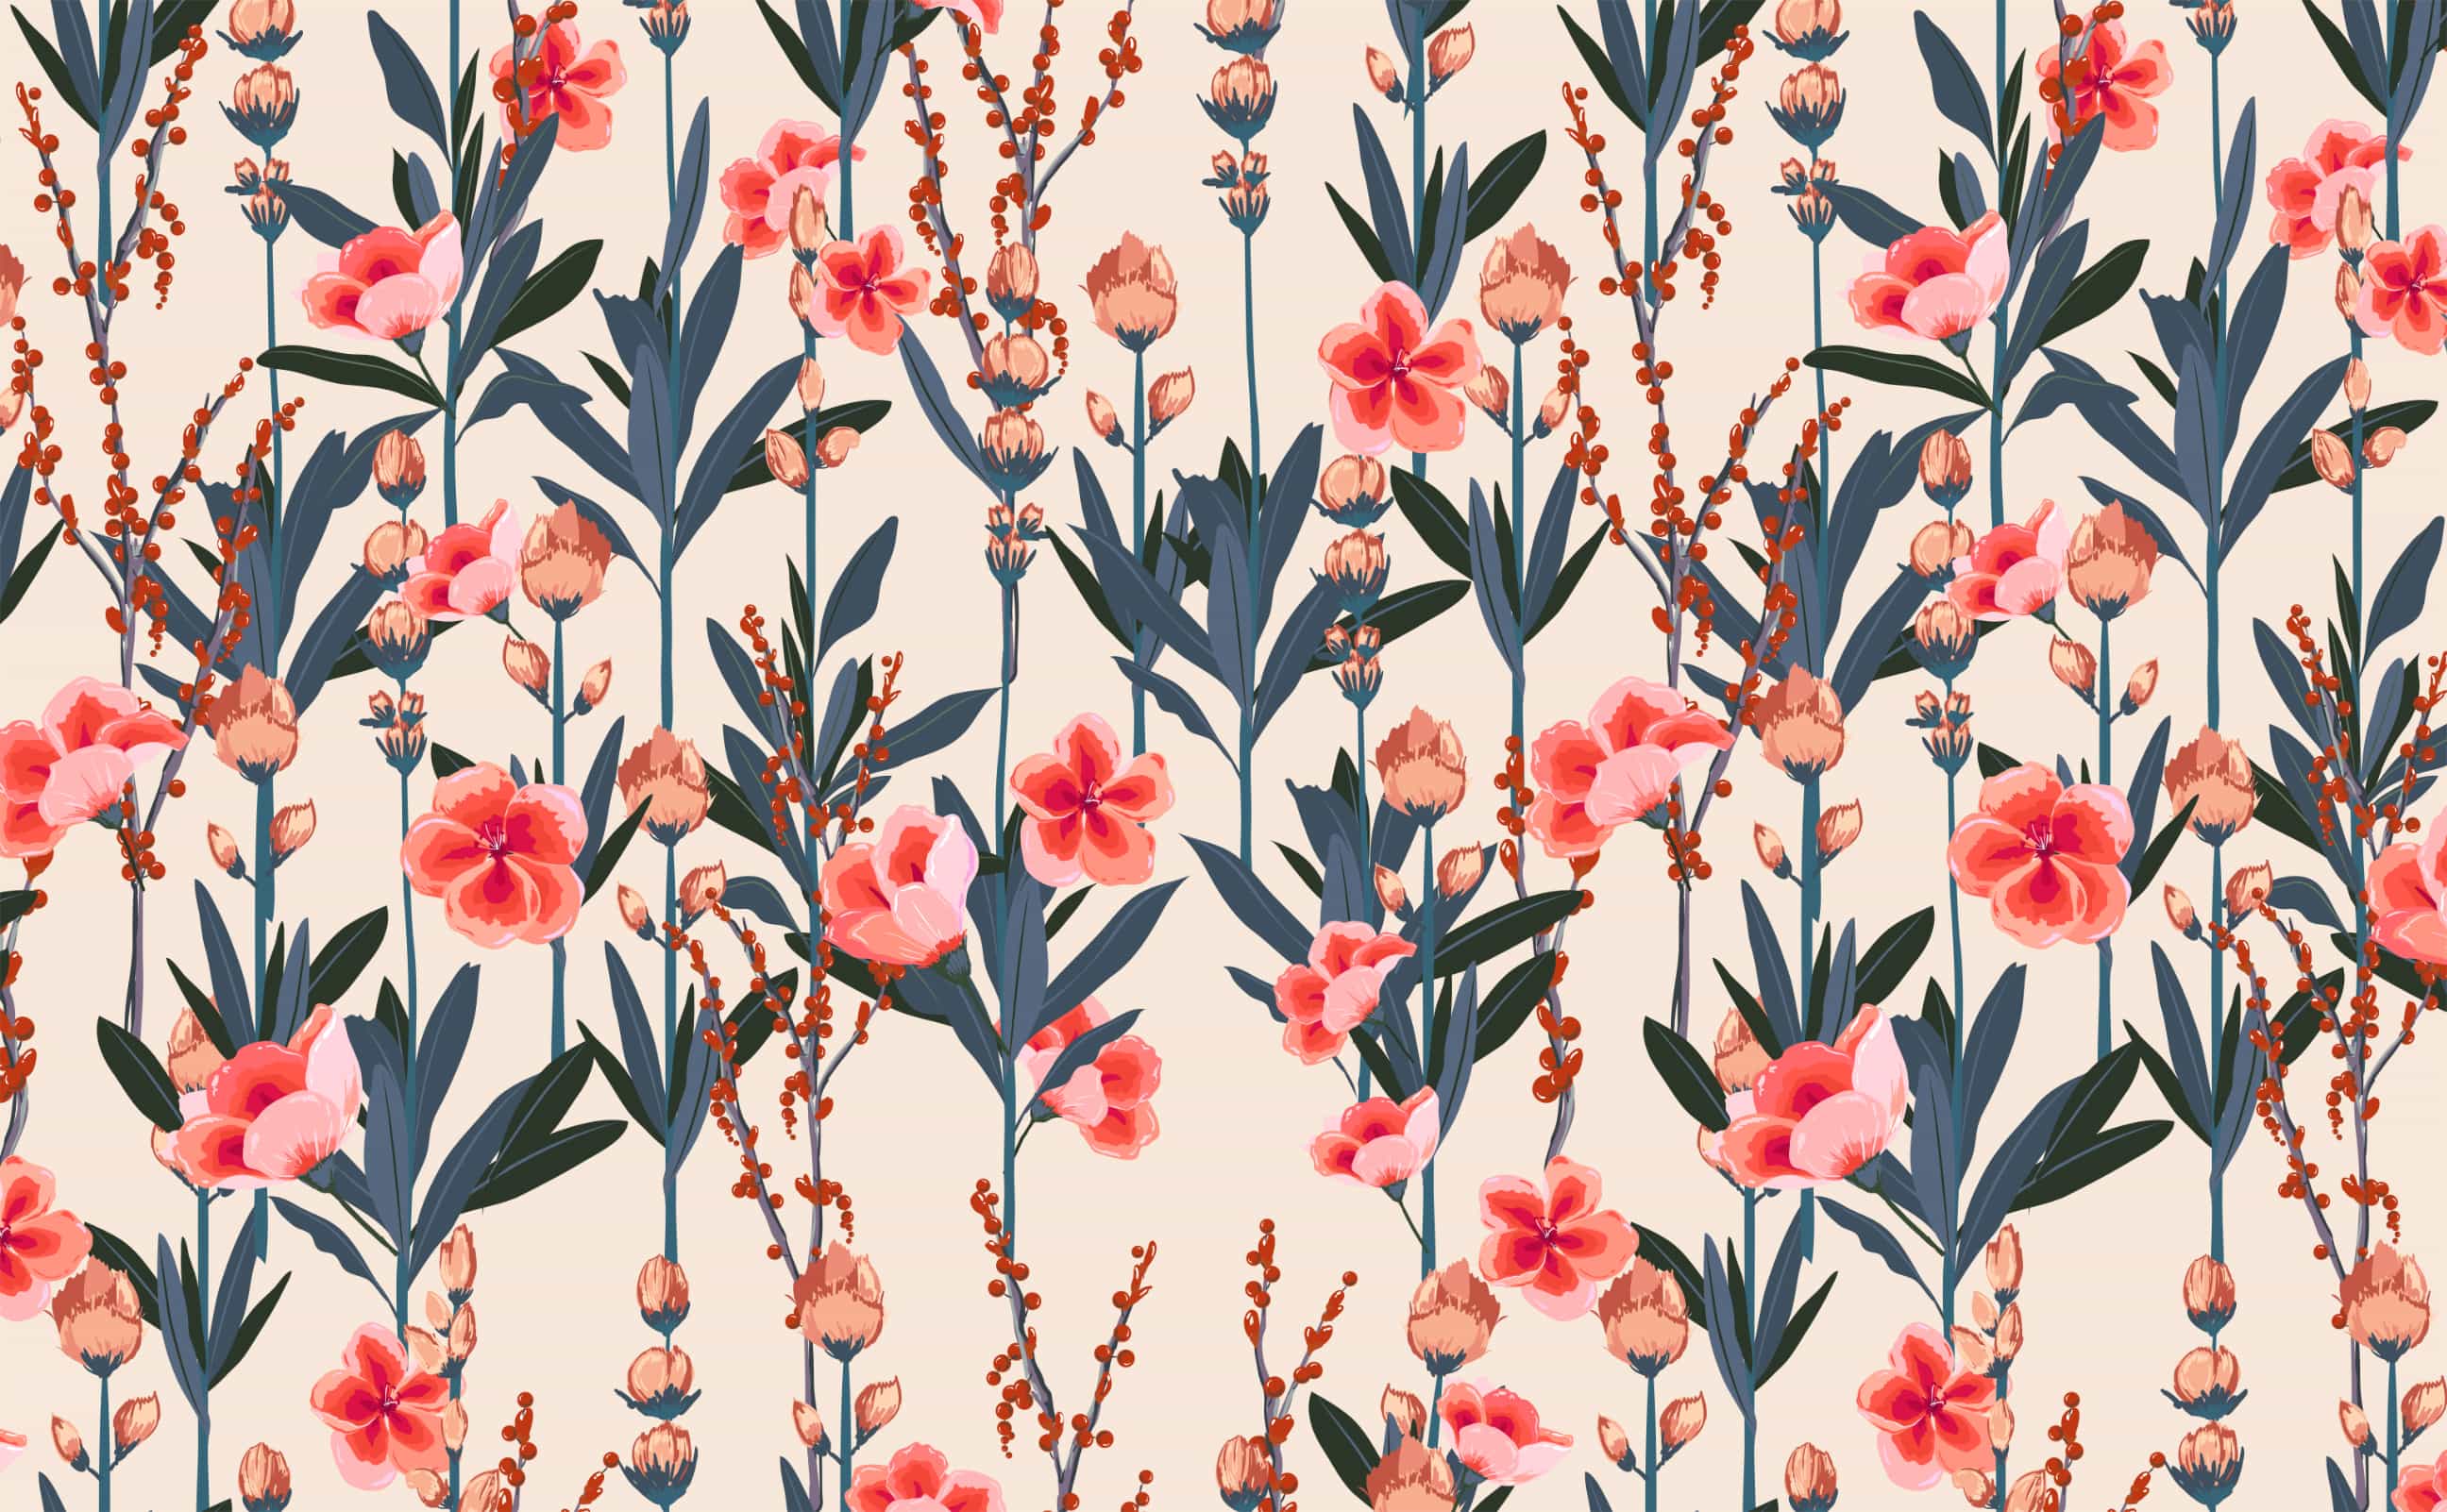 A pattern of pink flowers and green stems on a beige background - Hot pink